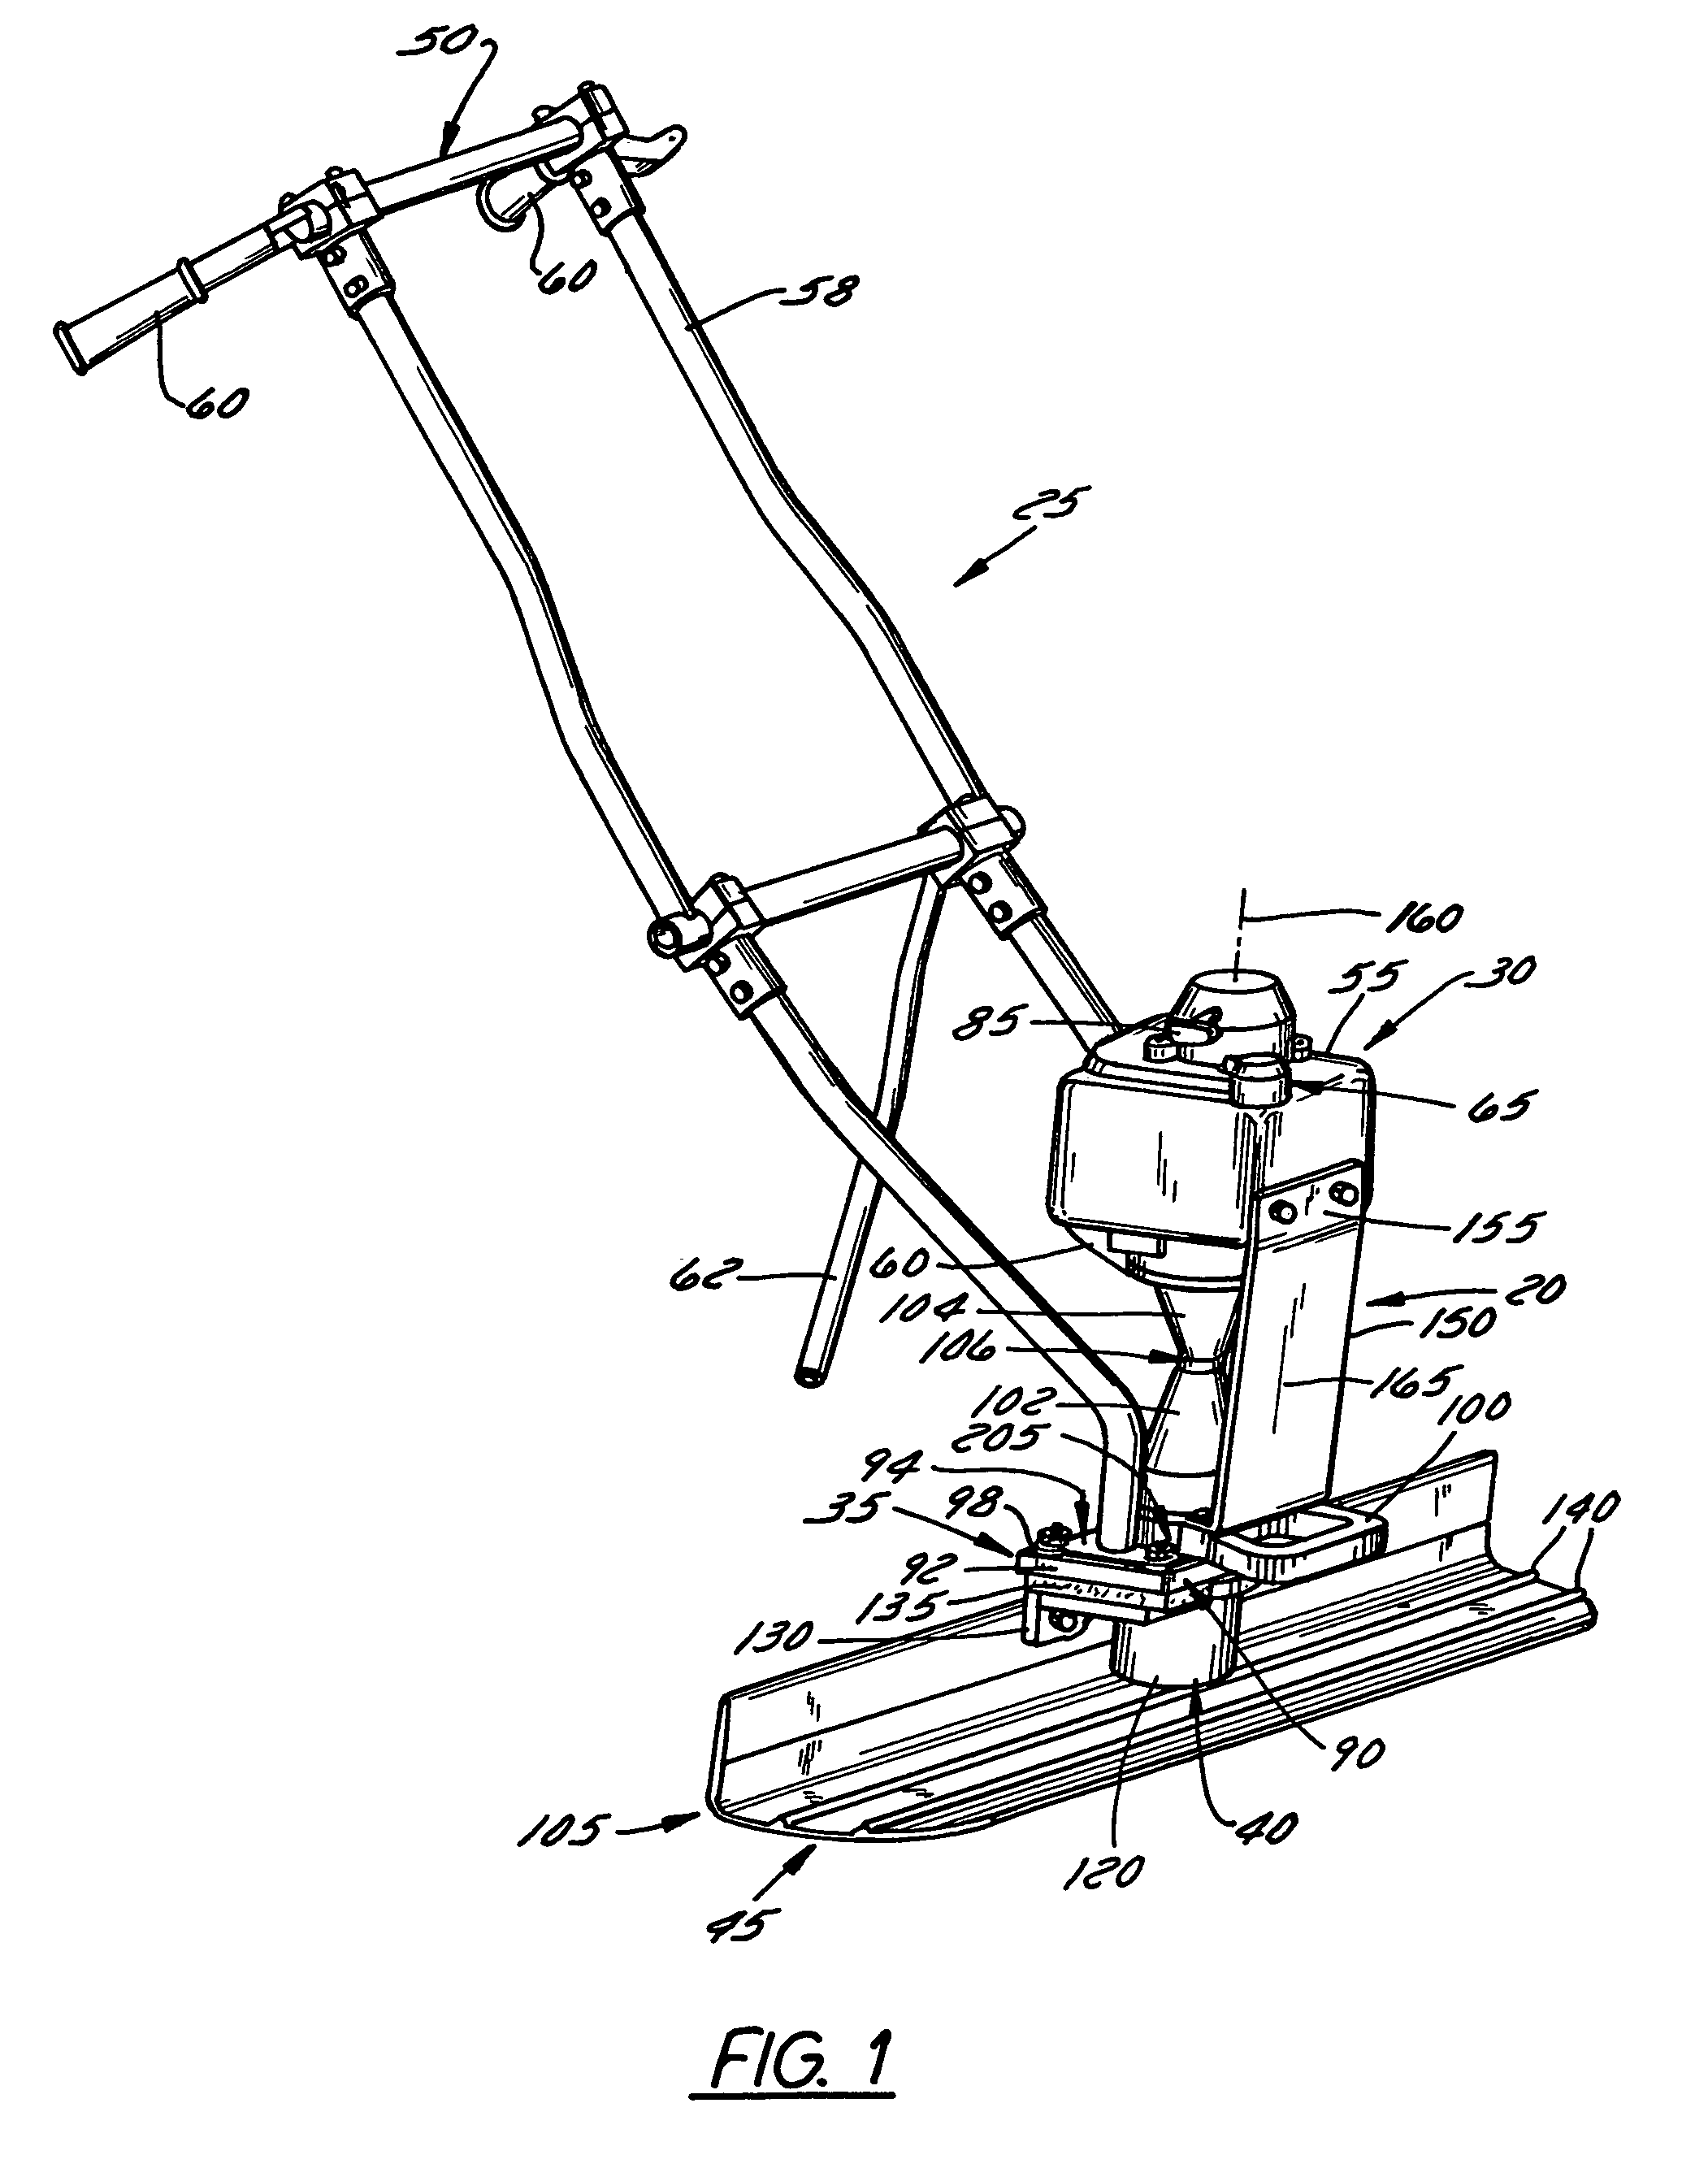 Portable vibratory screed with vibration restraint